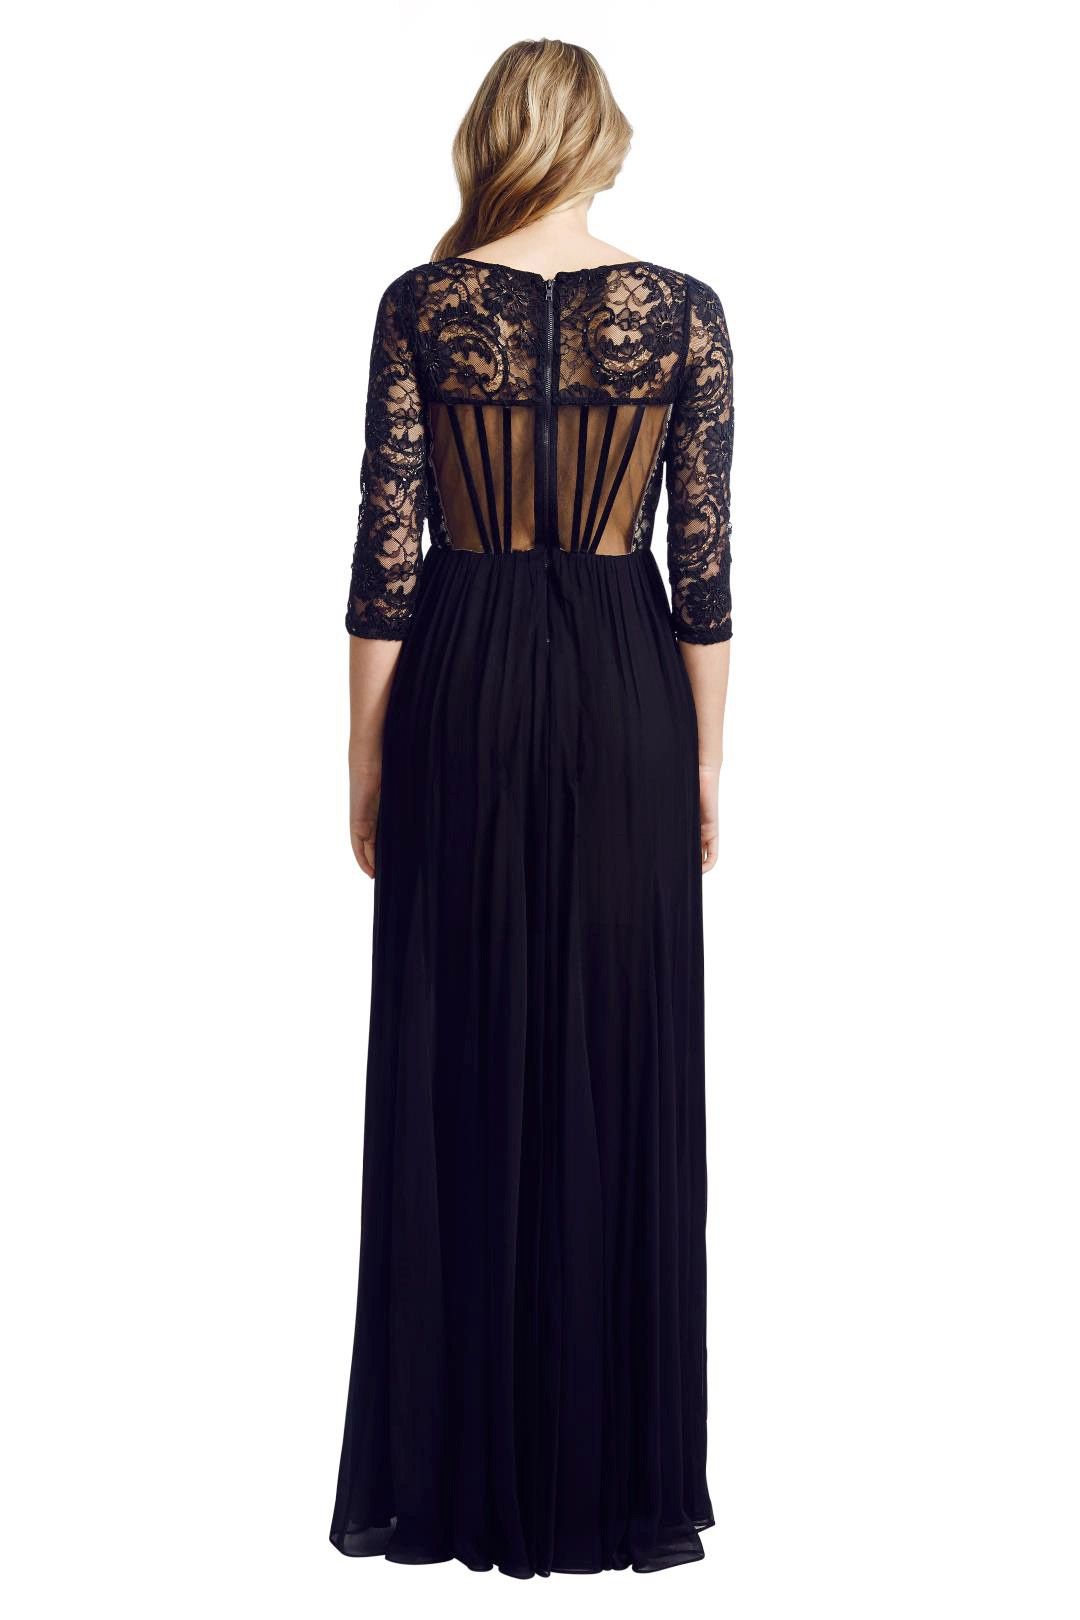 Alice and Olivia - Robinson Sequined Lace and Silk-Georgette Gown - Black - Back